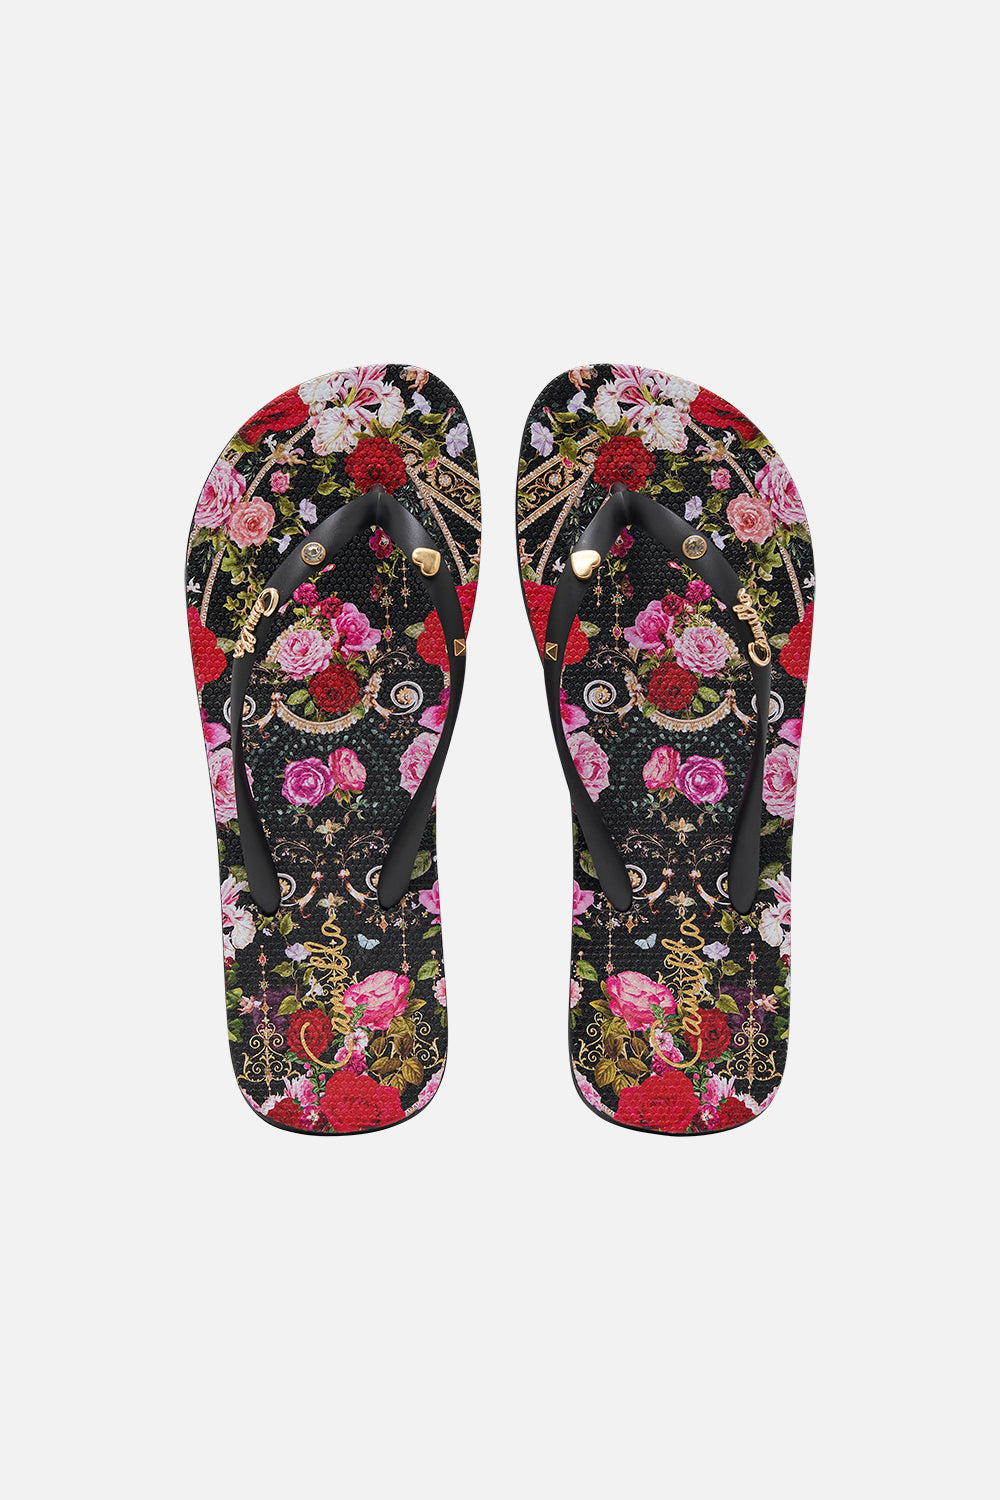 Product view of CAMILLA womens resortwear thongs in Reservation For Love print 